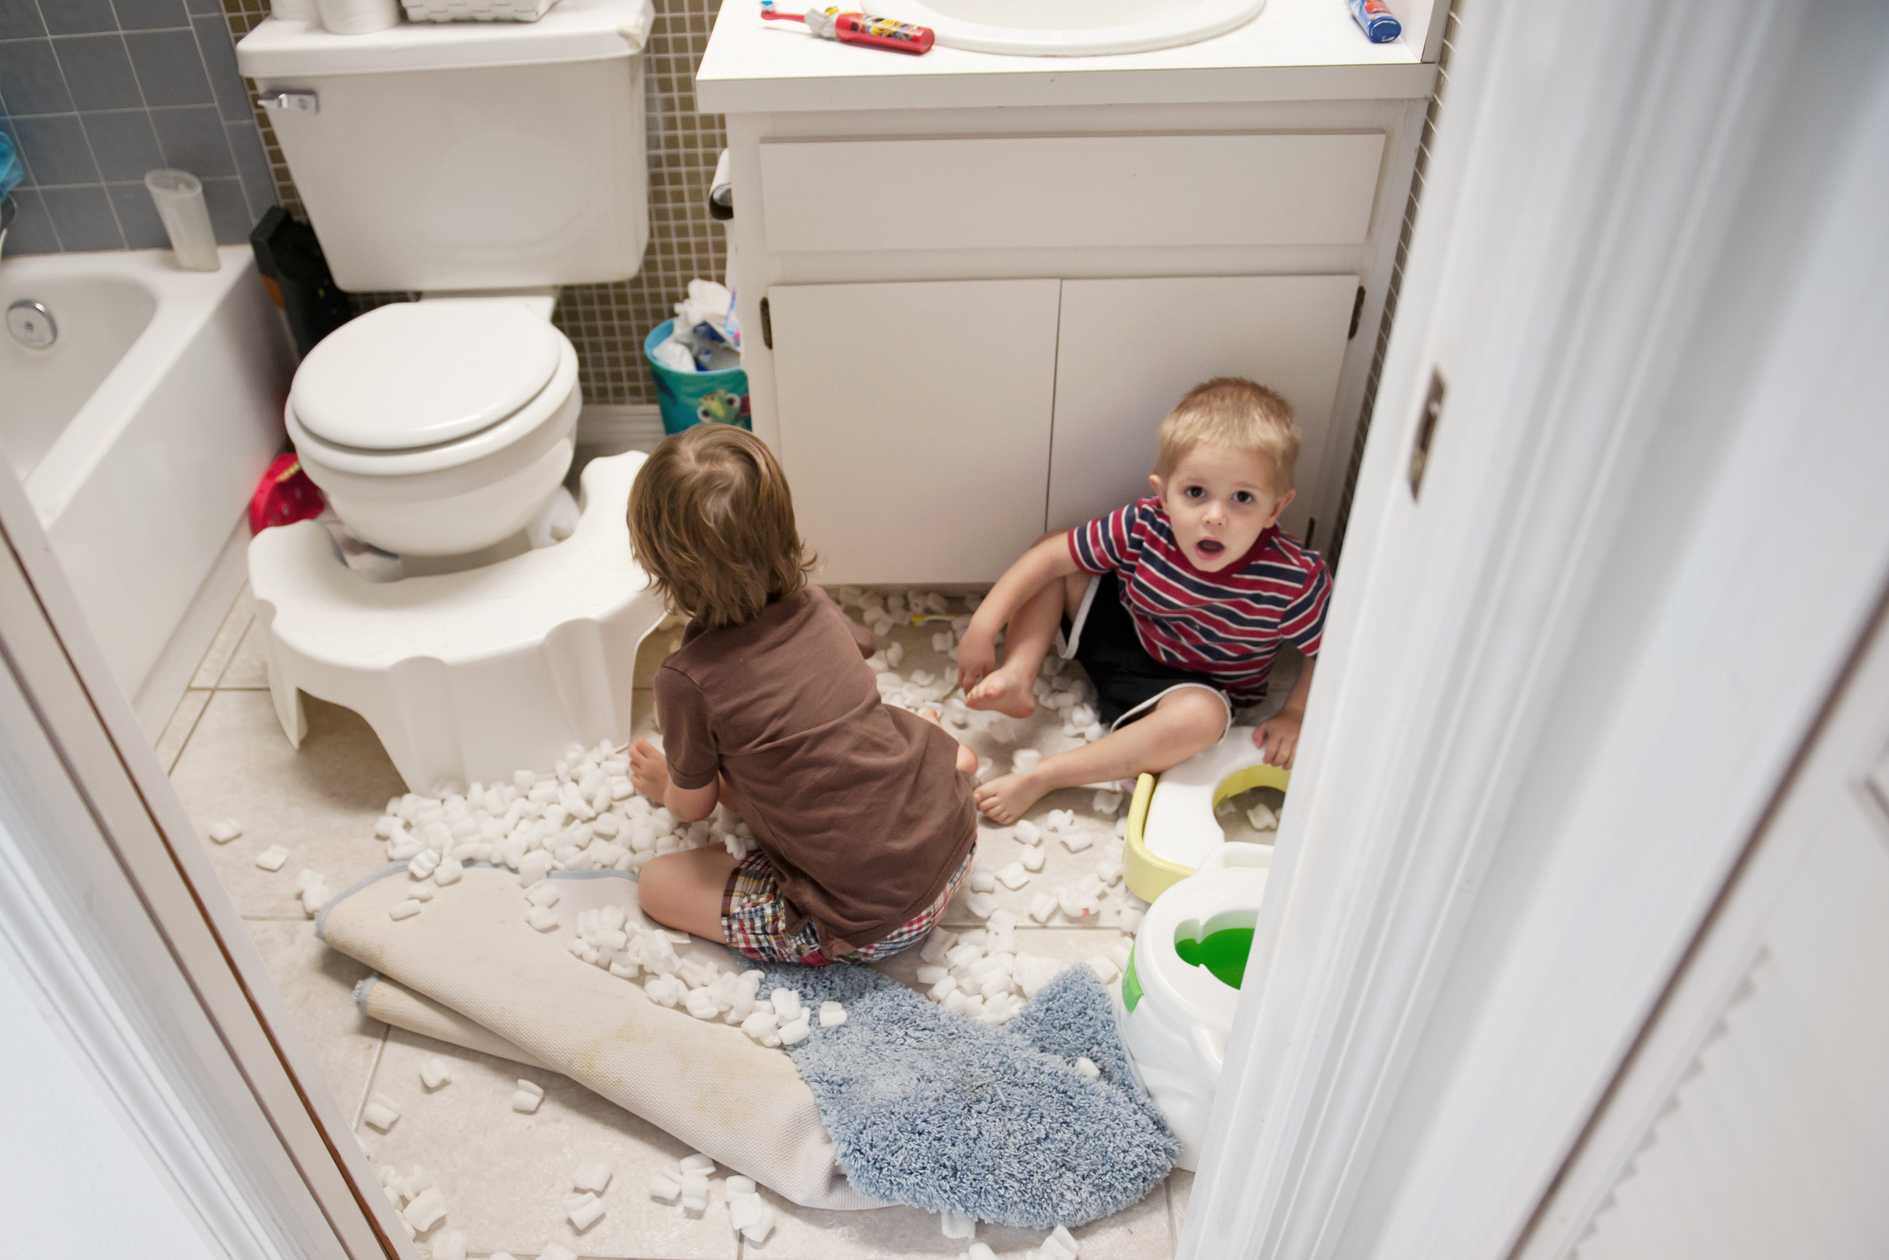 <p>  <em>"Keeping the house clean with a toddler is like trying to brush your teeth while eating Oreos."</em> </p> <p>  This is one of my favorite quotes about toddlers because it could not be more true! One of my SAHM friends was sick and her husband had to take over. This was his statement after one whole day caring for their children with no help. What many people don't realize is that being a stay at home mom means cleaning up after little tornadoes throughout the entire day. </p> <p>  <strong>The Reality:</strong> You will get your house clean, only to turn around and find your baby pulling poopy diapers out of the diaper pail or your toddler pouring all the water out of the dog's bowl. The chaos and cleanups are constant. </p> <p>  <strong>The Takeaway for Partners:</strong> When you come home and see the mess — know that your wife has likely dealt with 20 or more messes and this is just one of the most recent tornadic toddler outbreaks of the day. </p> <blockquote><h3>Helpful Hack</h3><p>    <a href="https://www.lovetoknow.com/parenting/toddlers/montessori-at-home" title="Montessori at Home: Transform Your Space & Help Your Kids Learn ">Monessori at home</a> is a great way to cut back on the chaos. I love this style of learning because it focuses on practical life lessons as well as the typical educational endeavors that you find at any other school. Everything has a place and your child can only partake in one activity at a time. They are a part of the clean ups and daily chores as well.   </p></blockquote>